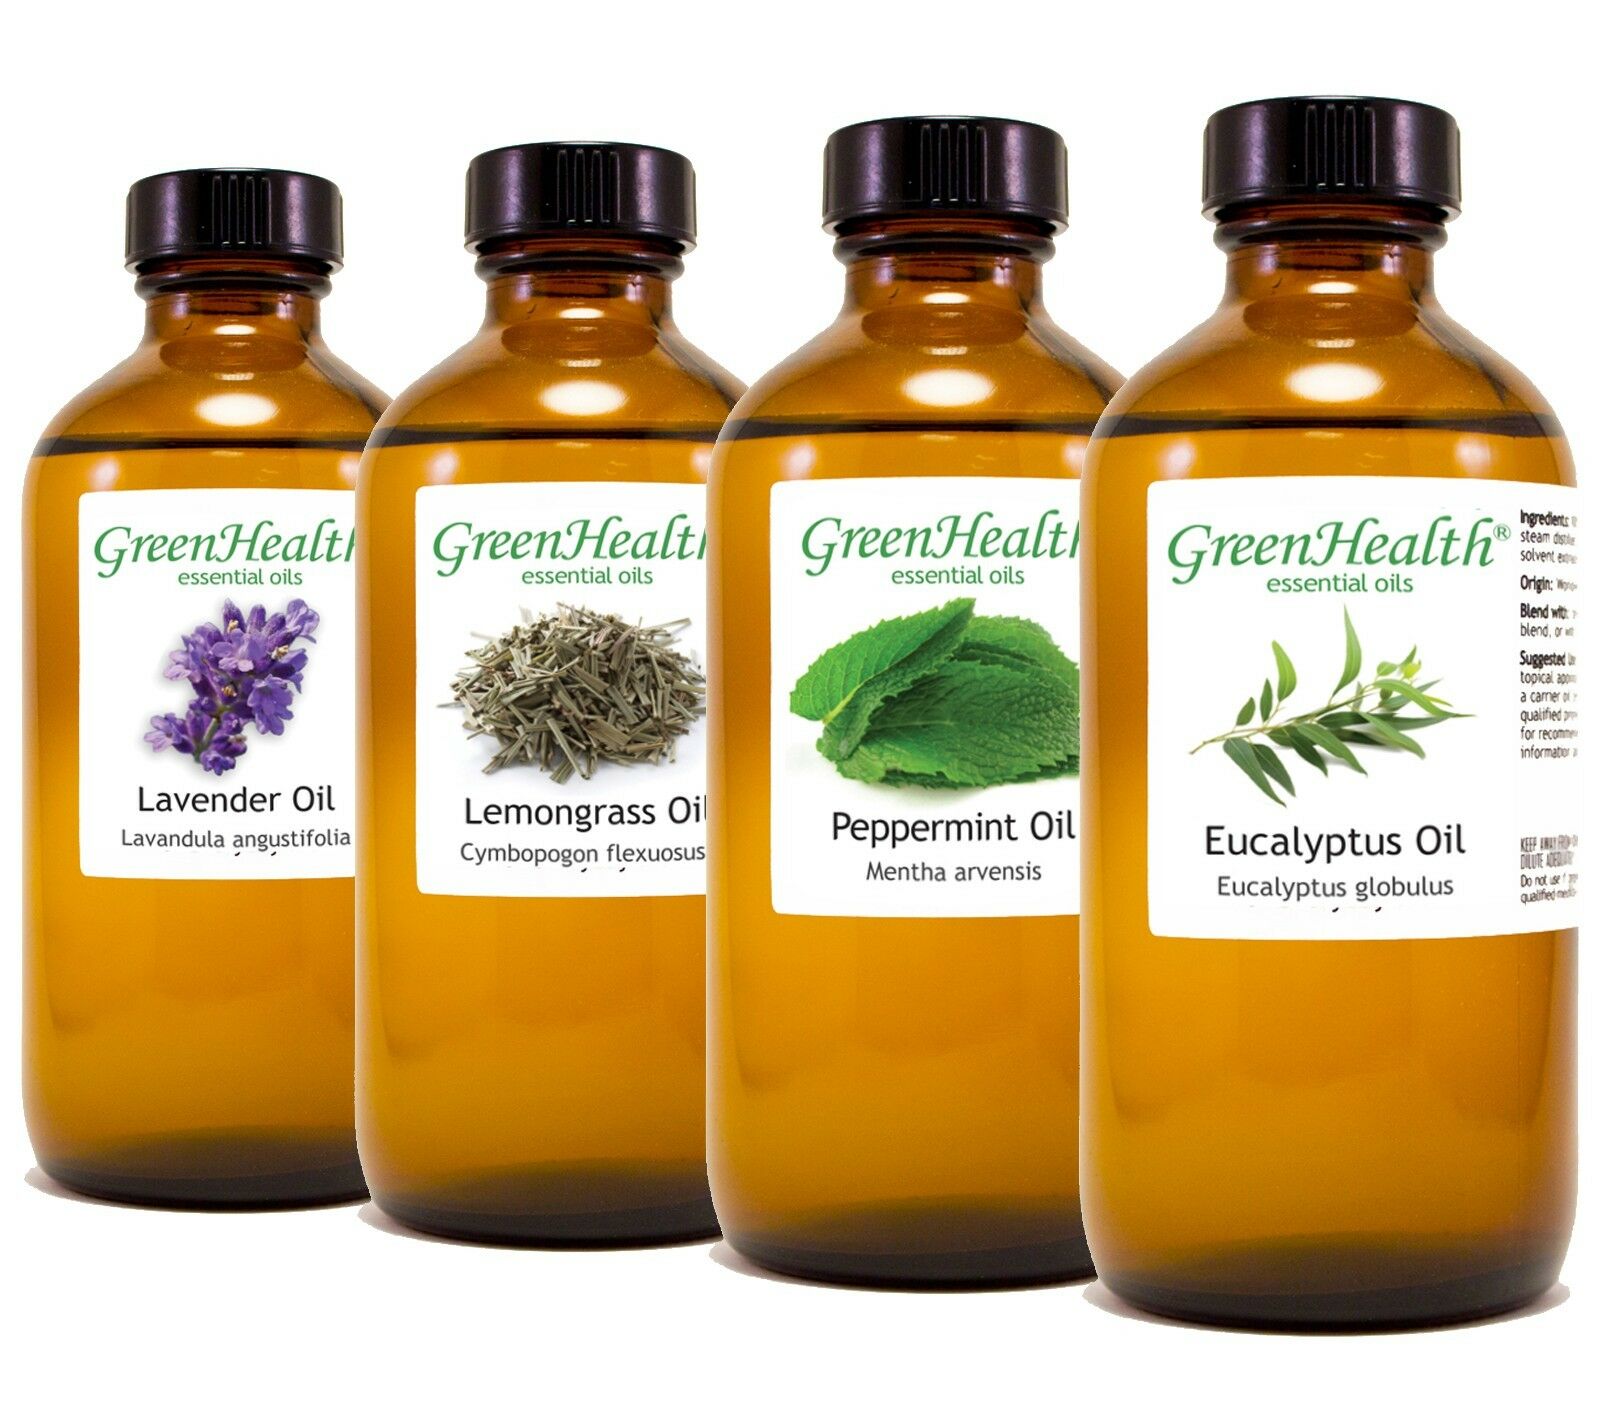 8 Fl Oz Essential Oil In Amber Glass, Free Shipping, 60+ Pure Natural Oils